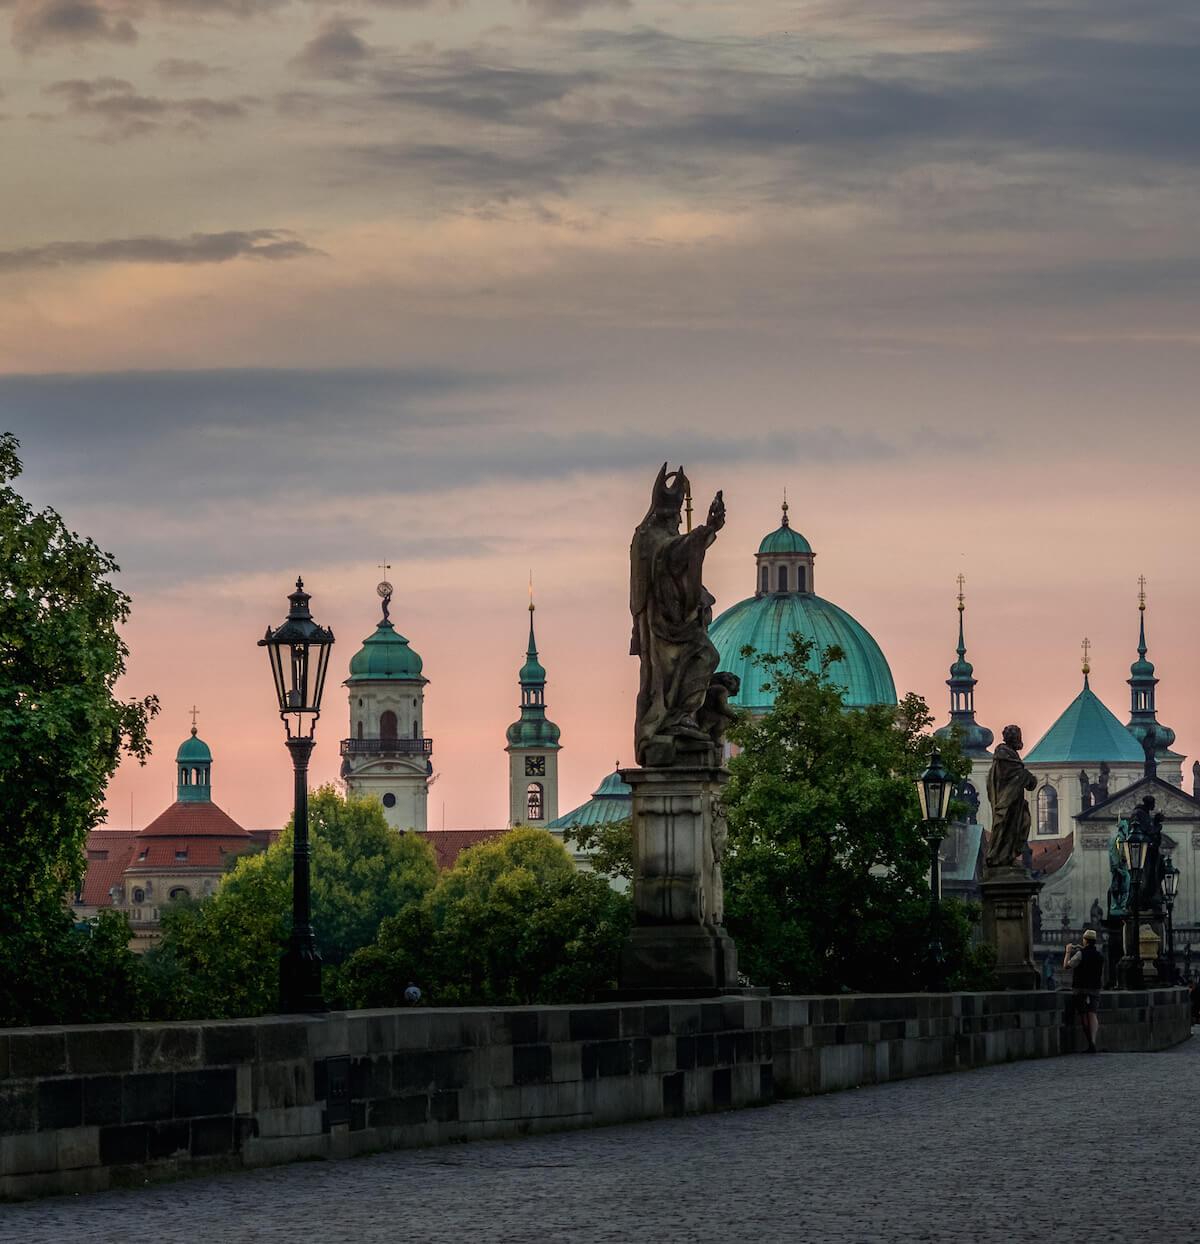 Welcome to the Czech Republic- from the Charles Bridge you can see so many spires